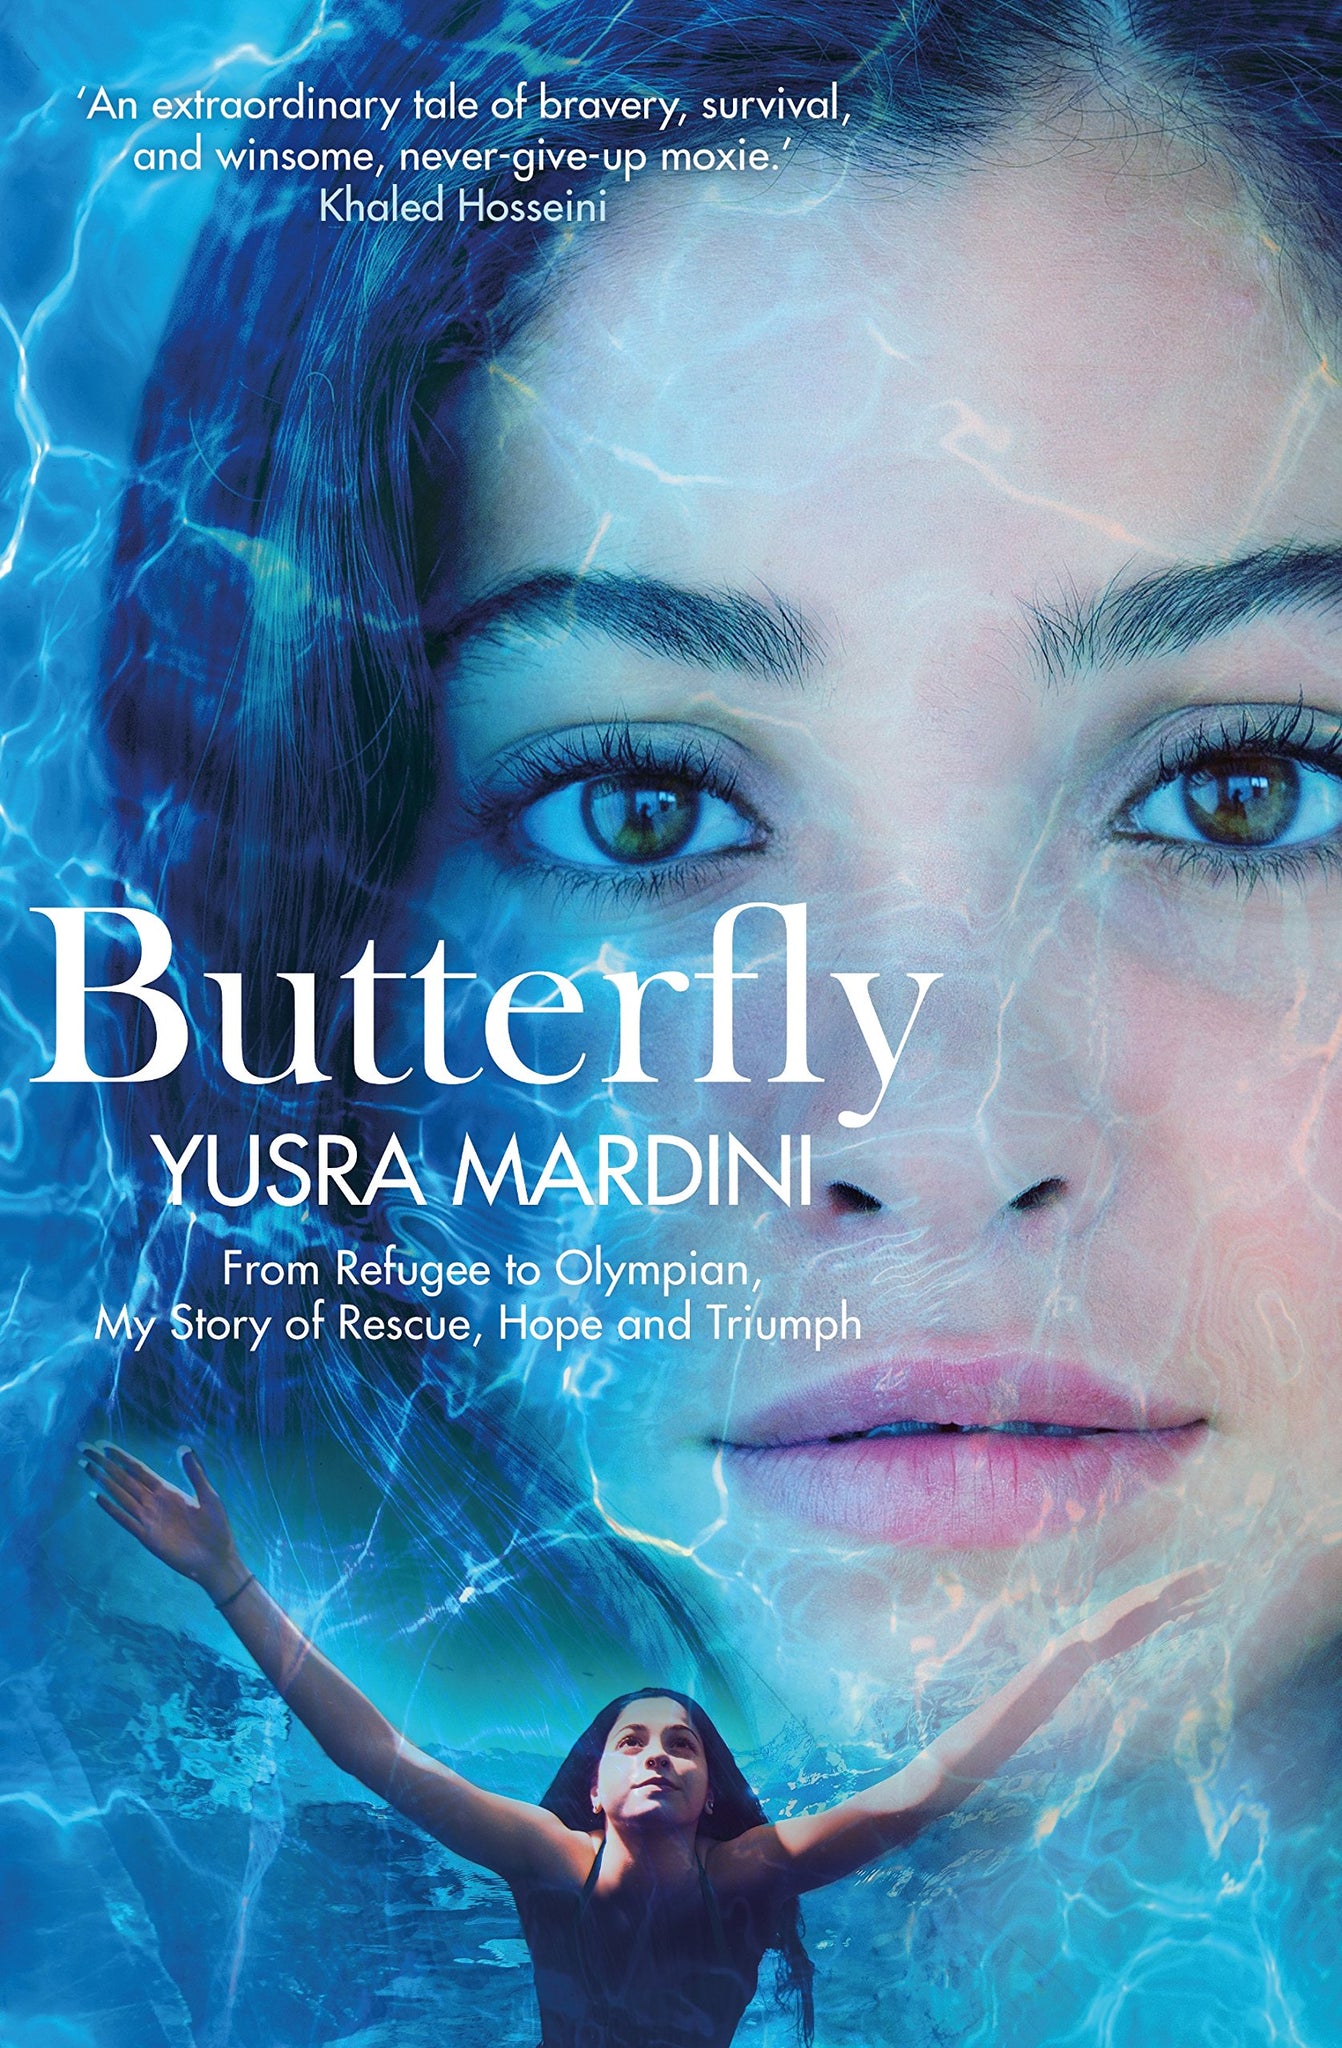 Butterfly: From Refugee to Olympian by Yusra Mardini